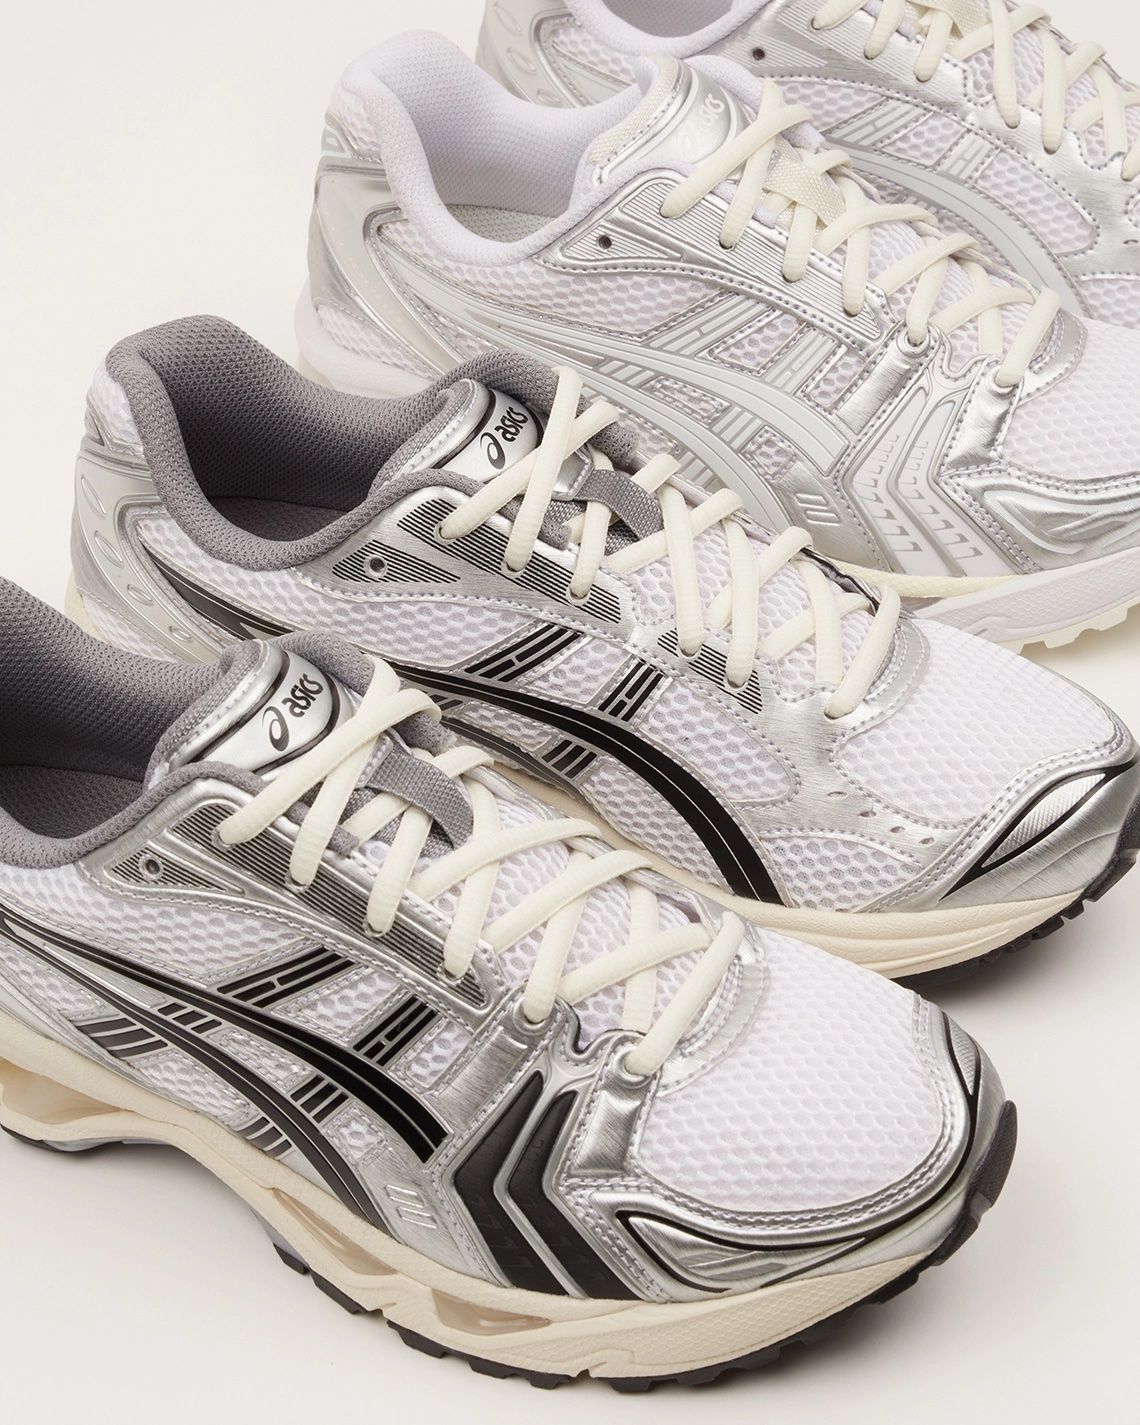 Asics Sneakers Are Everywhere, Why Now? We Found Out